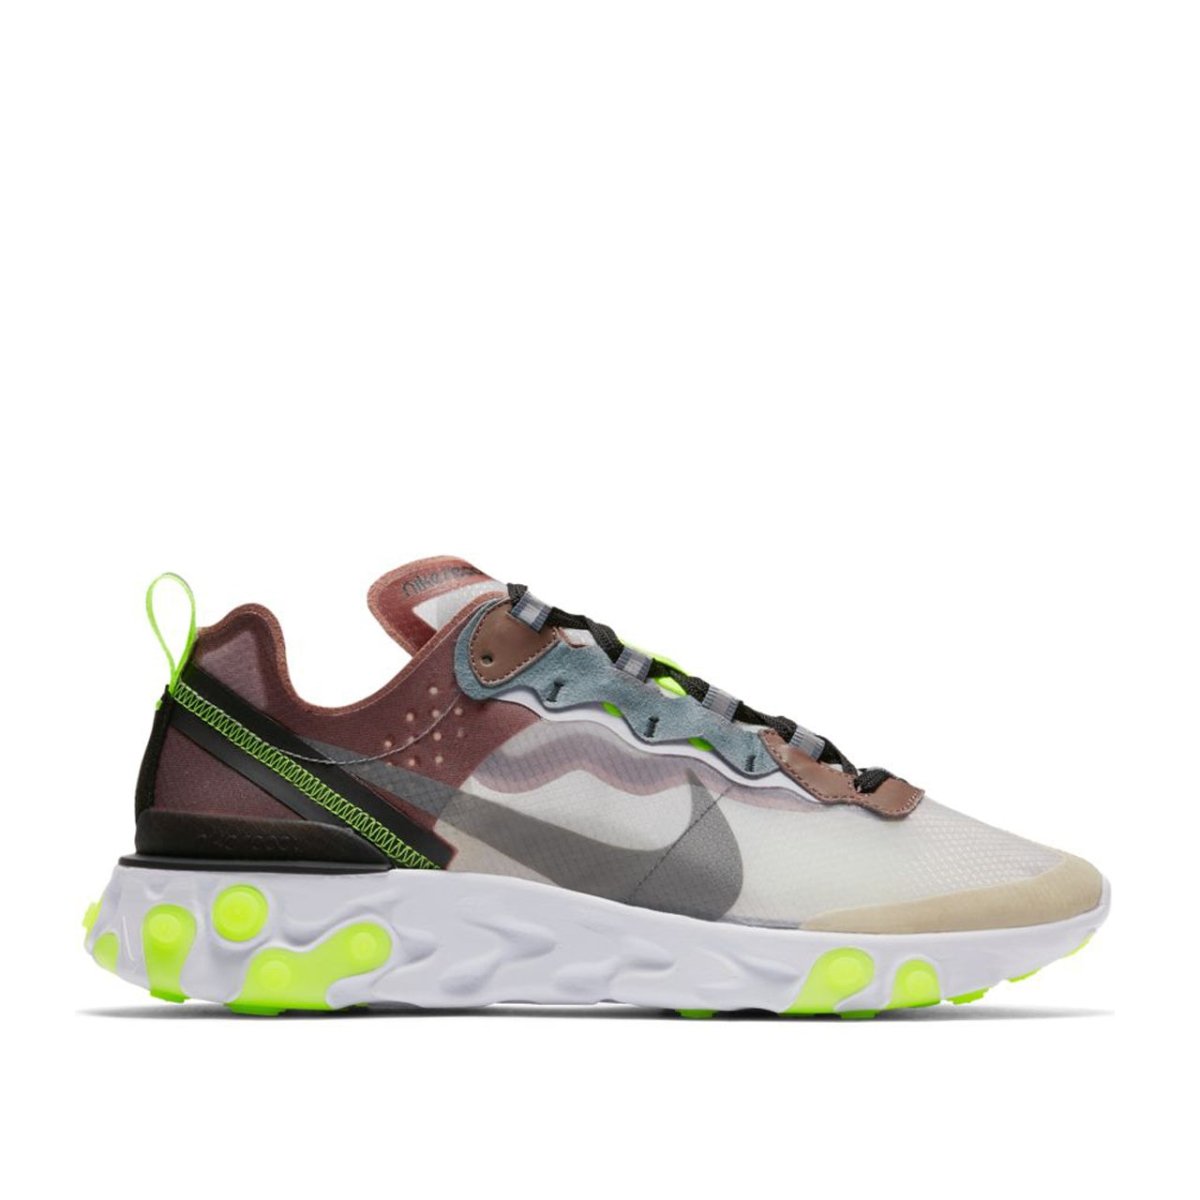 nike react element 87 limited edition